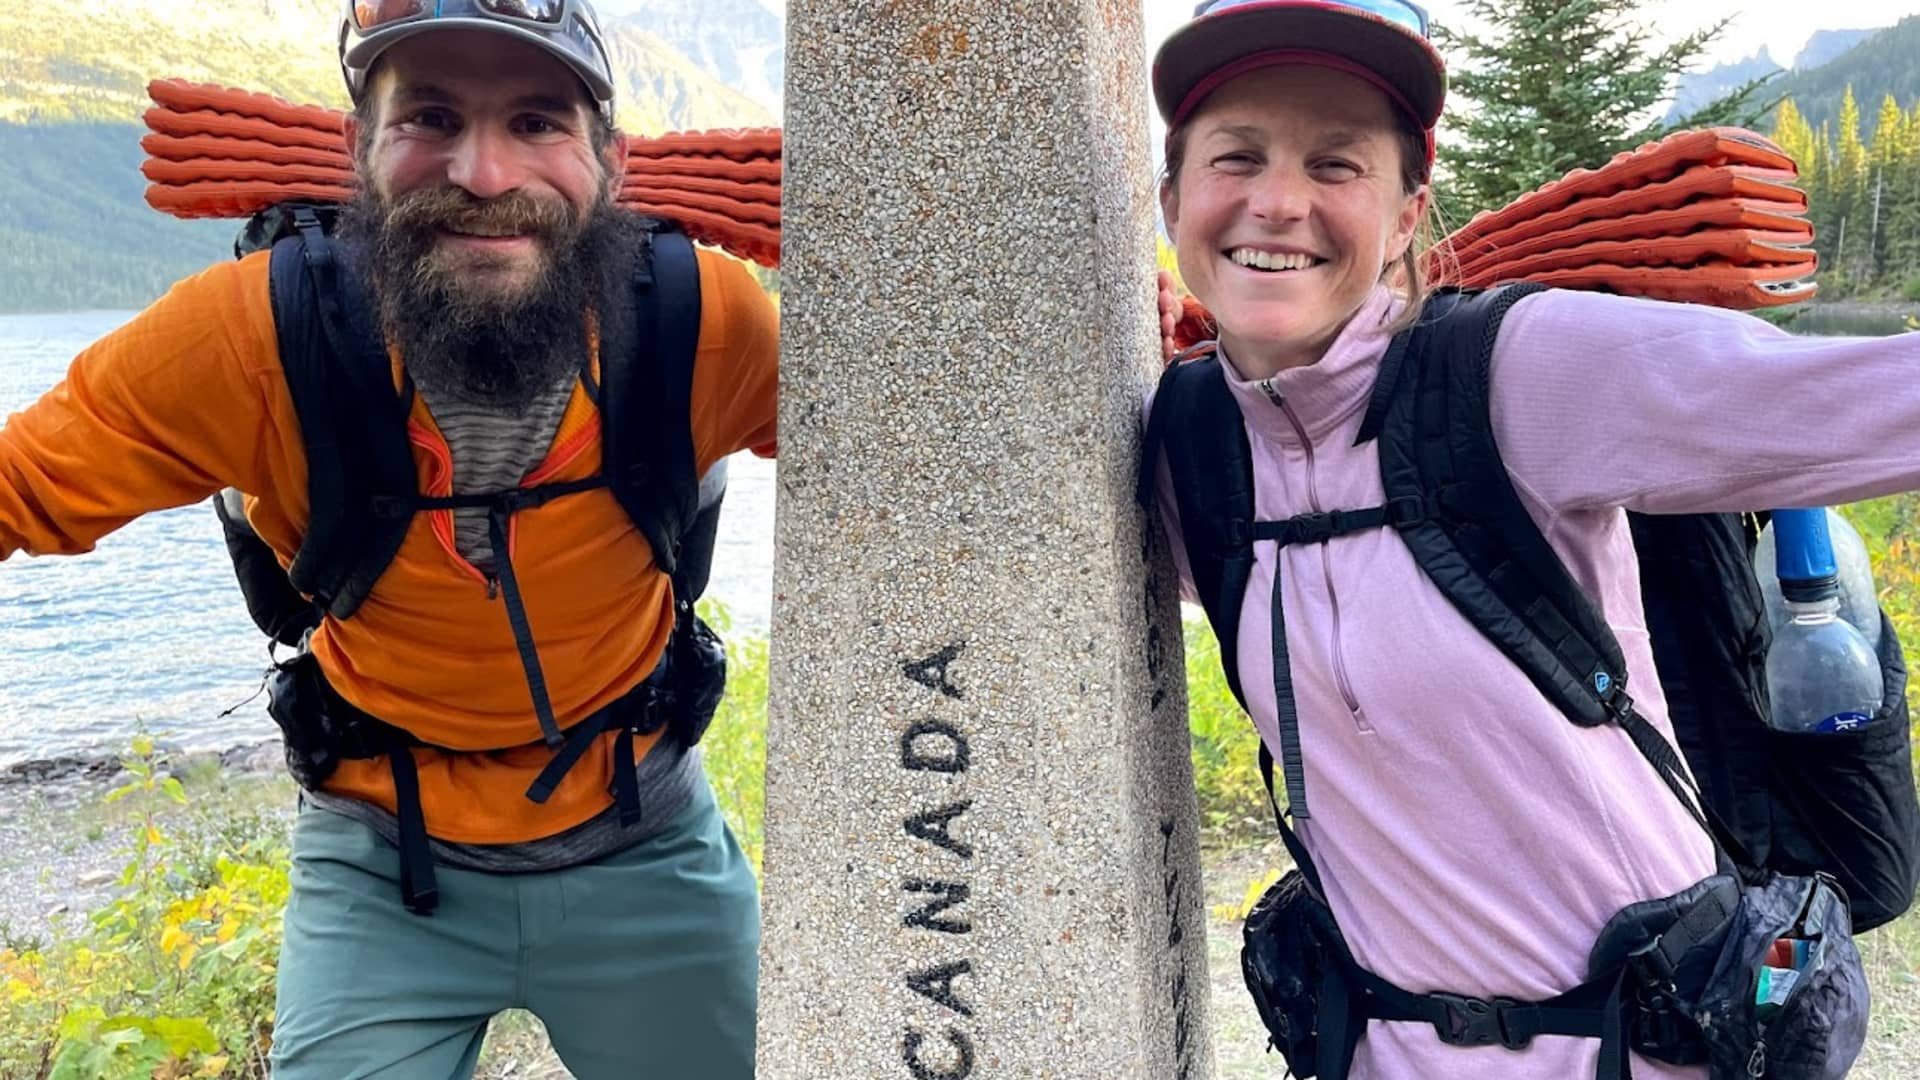 Beissinger and Miller arrive in Canada following a four-month hike that began at the U.S.-Mexico border.